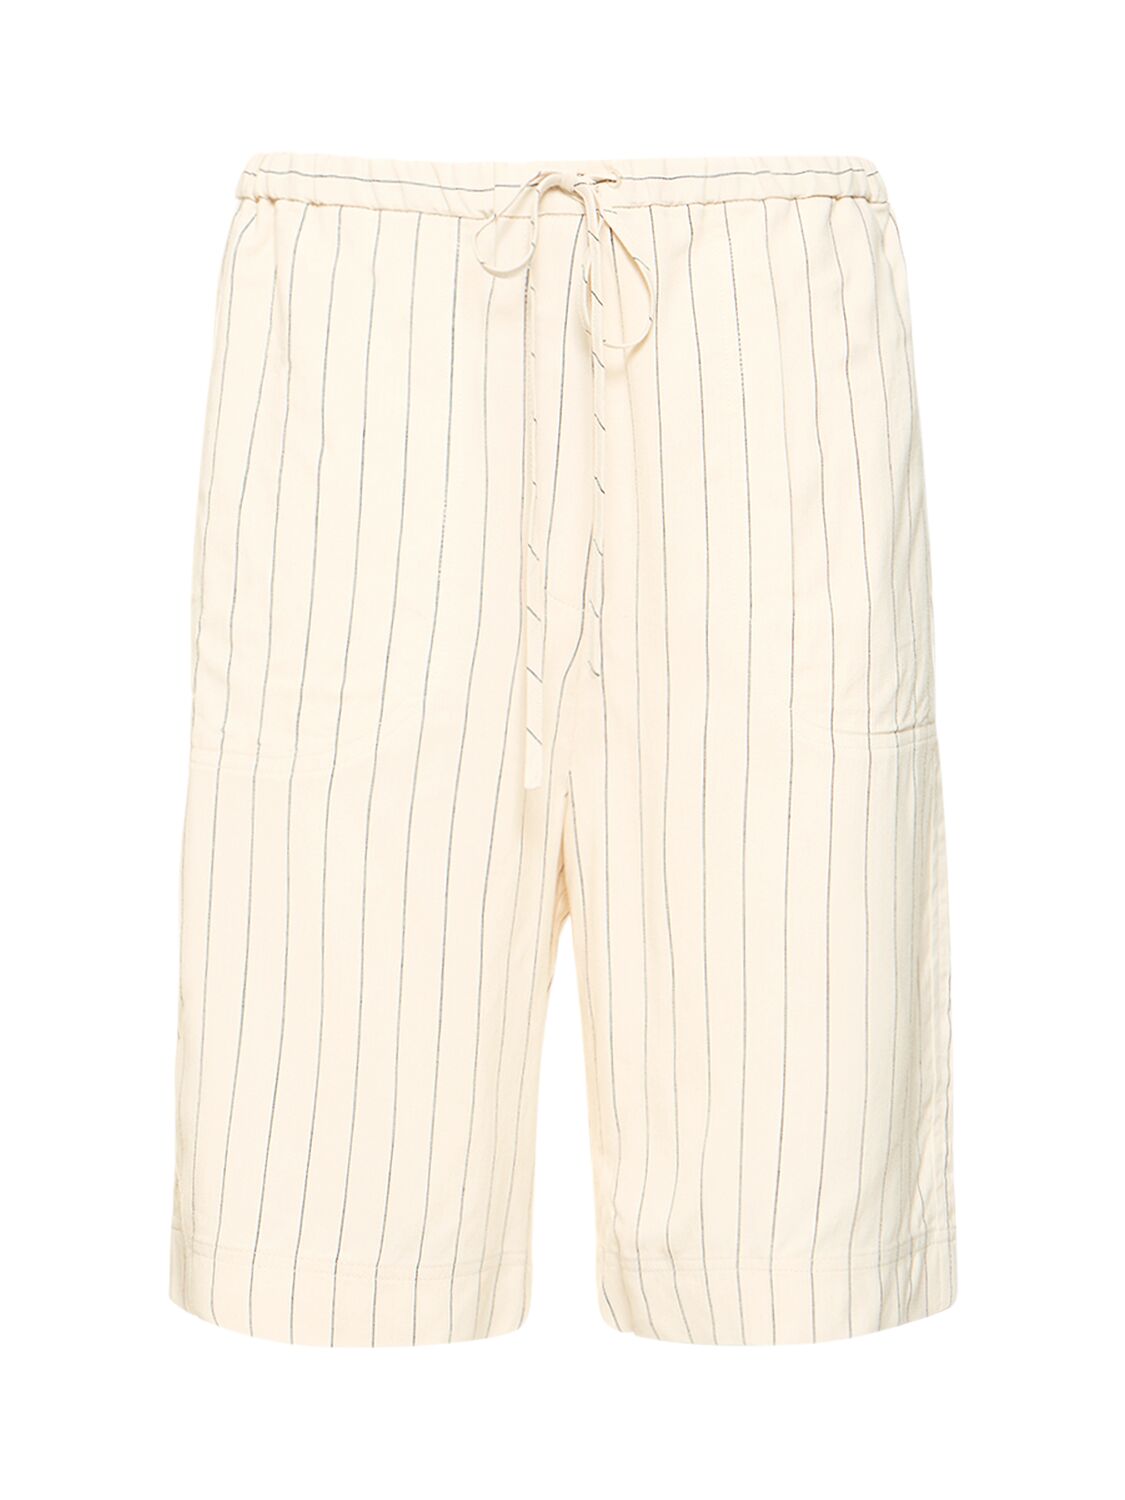 Image of Relaxed Pinstriped Shorts